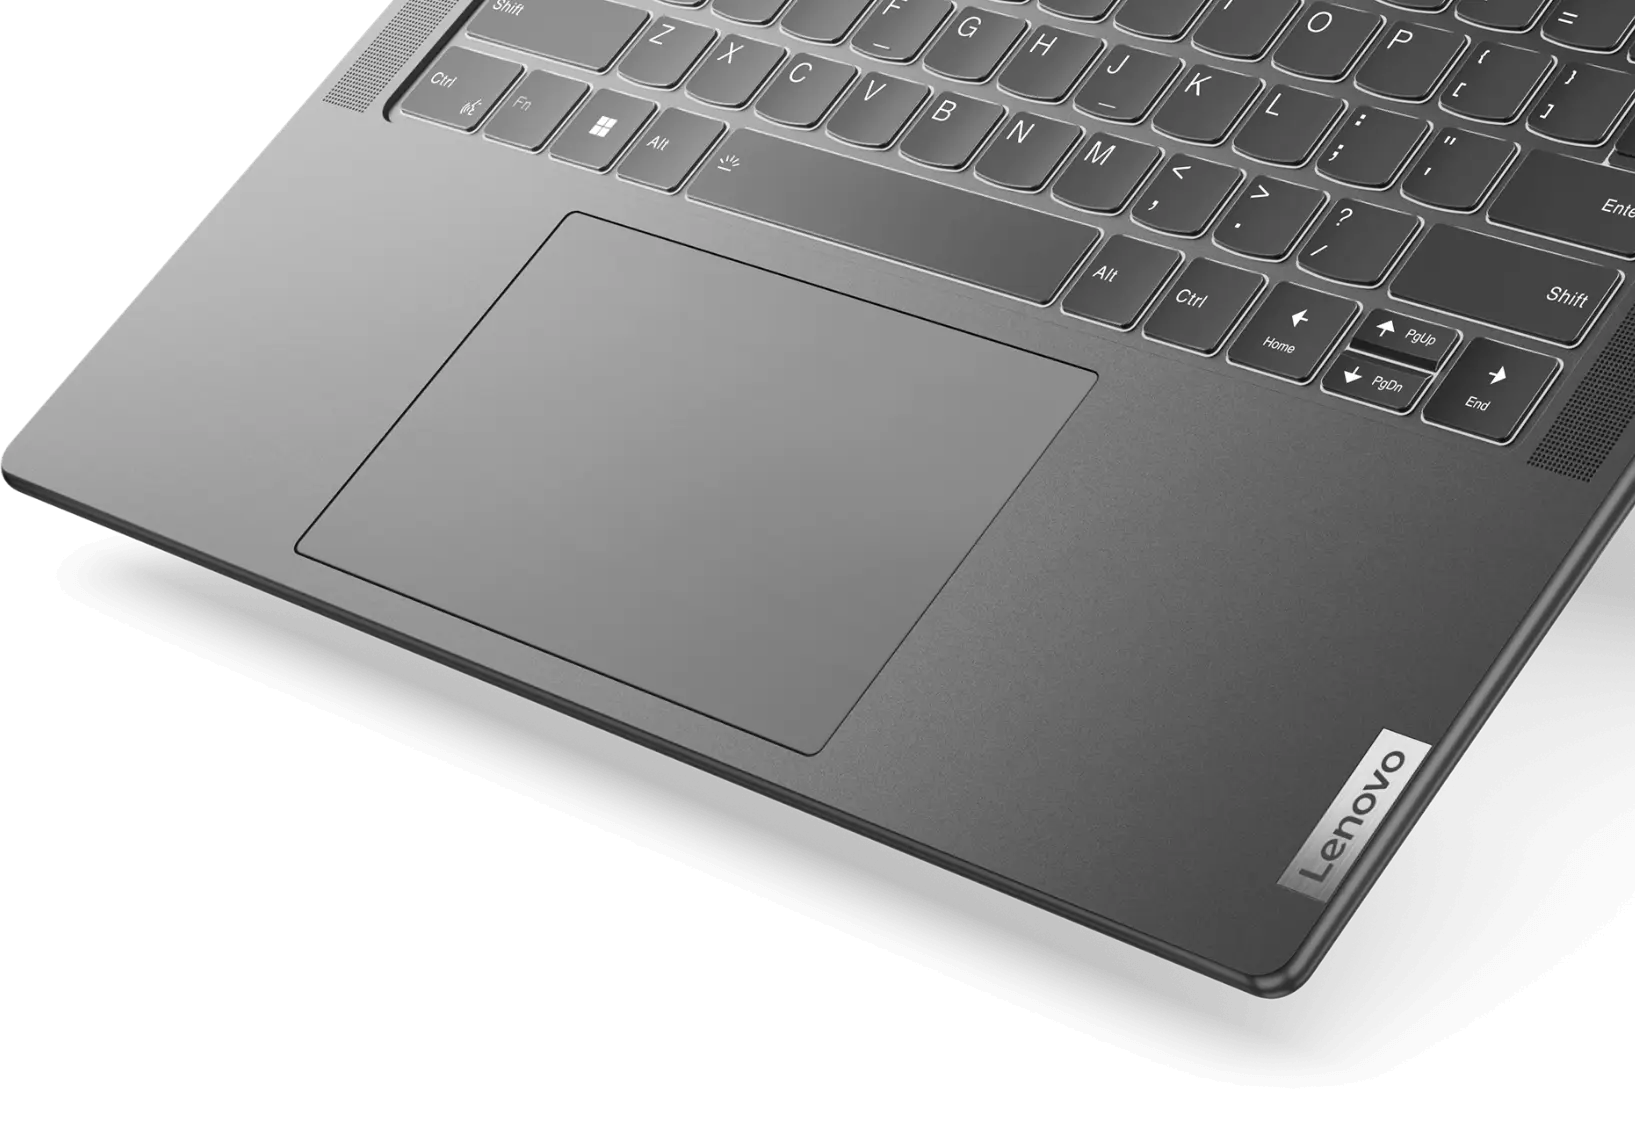 Closeup view of the touchpad on the Lenovo Yoga 9i Pro